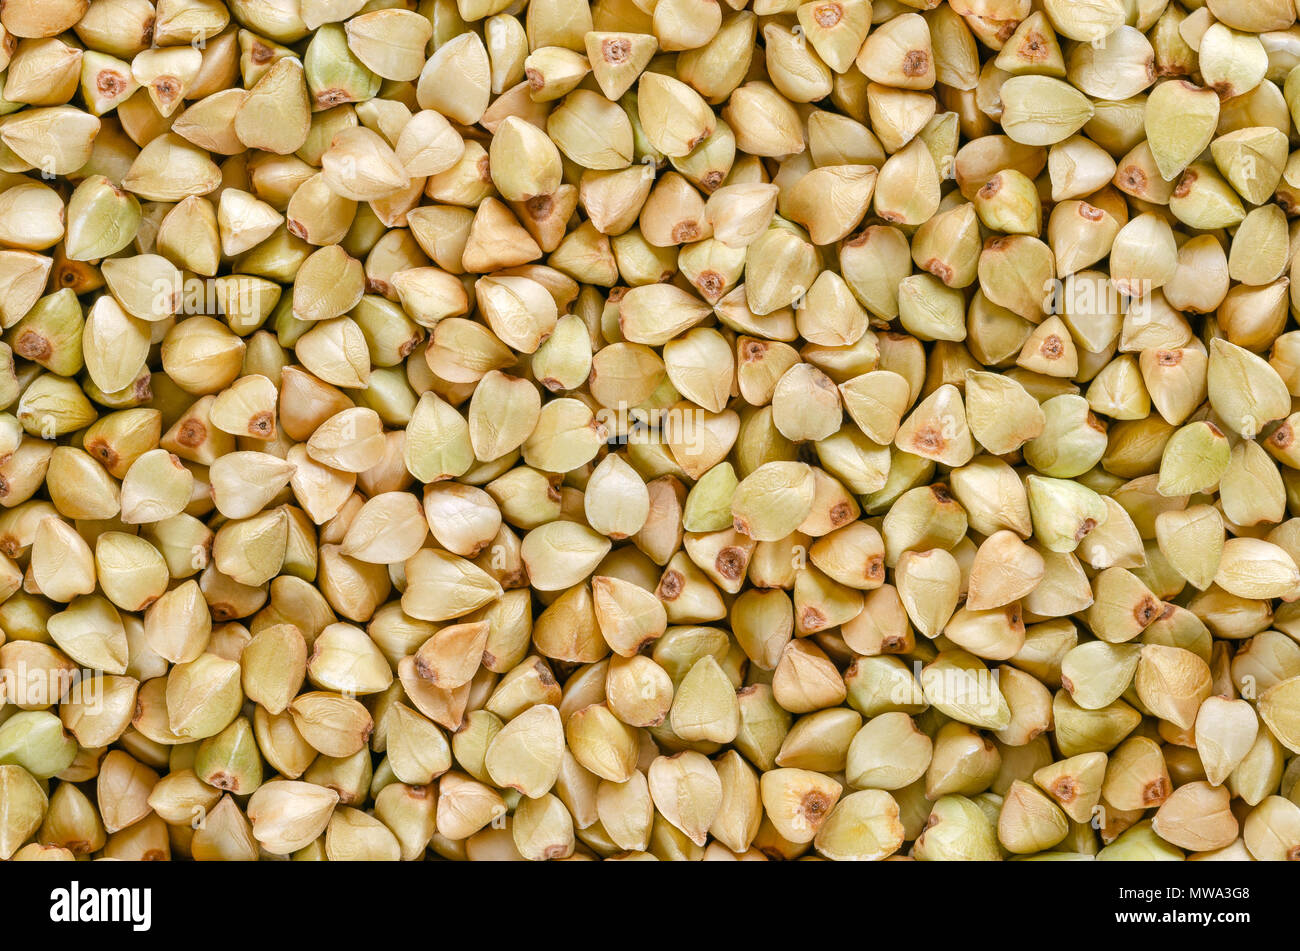 Hulled common buckwheat grains, macro photo from above. Gluten free pseudocereal. Fagopyrum esculentum, also known as Japanese or silverhull buckwheat Stock Photo